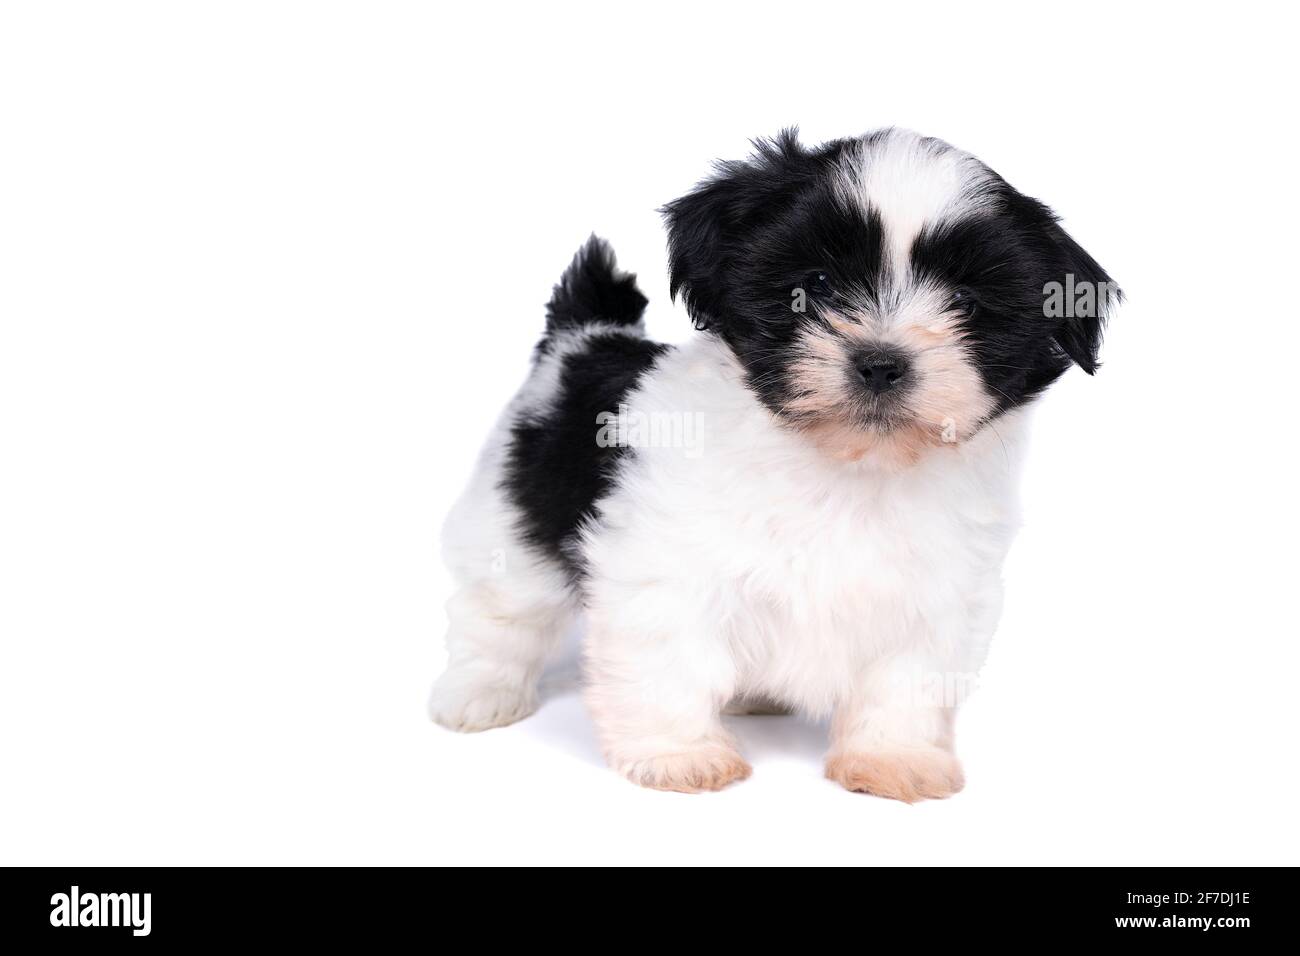 What To Feed A 5 Week Old Shih Tzu Puppy